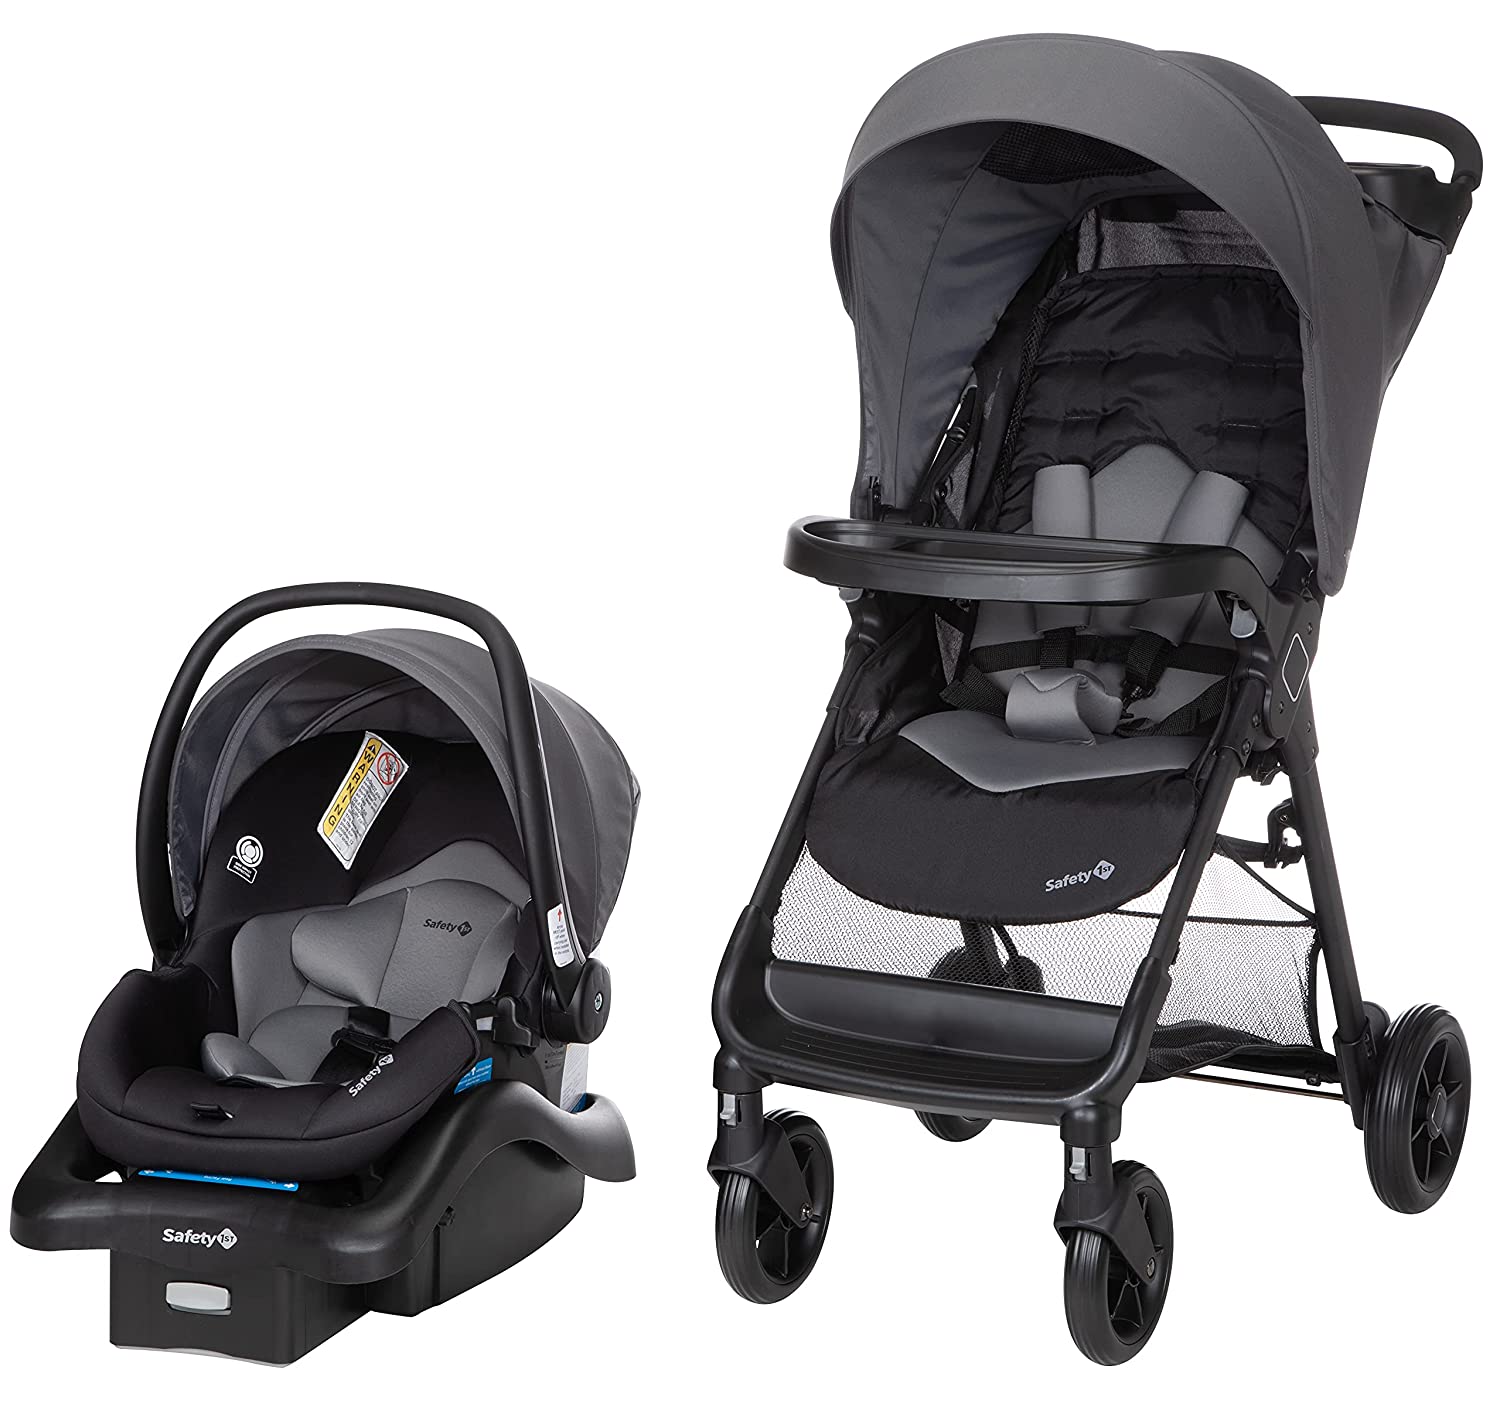 Safety 1st Car Seat & Easy-Carry Stroller Travel System